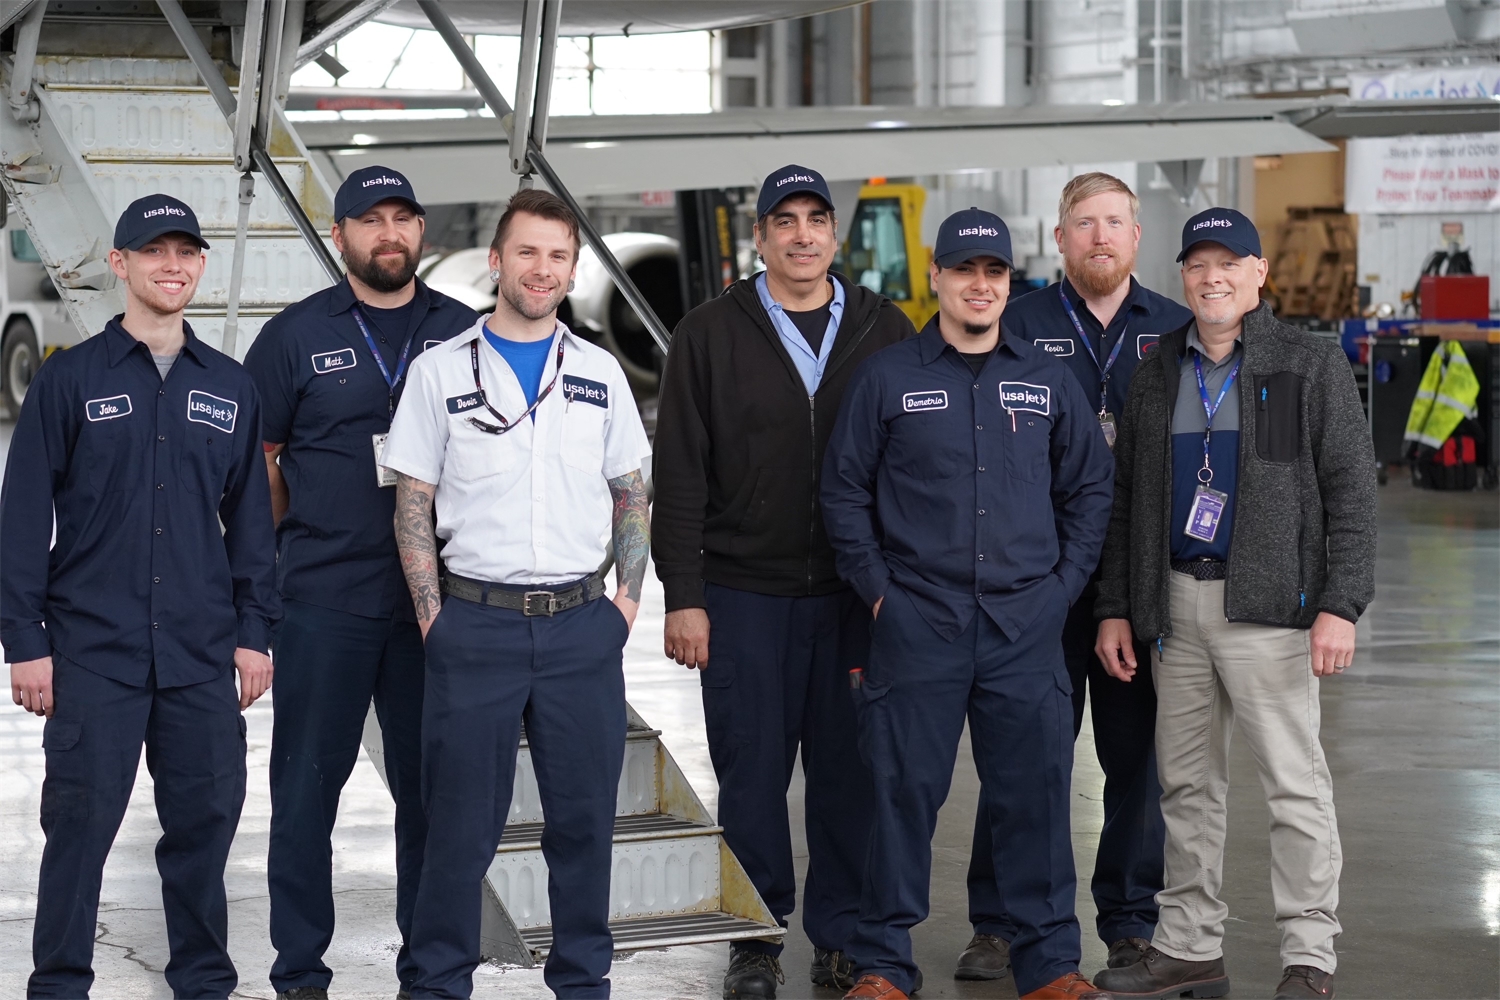 Some of our amazing mechanics pictured at the historic Packard Hangar at Willow Run Airport